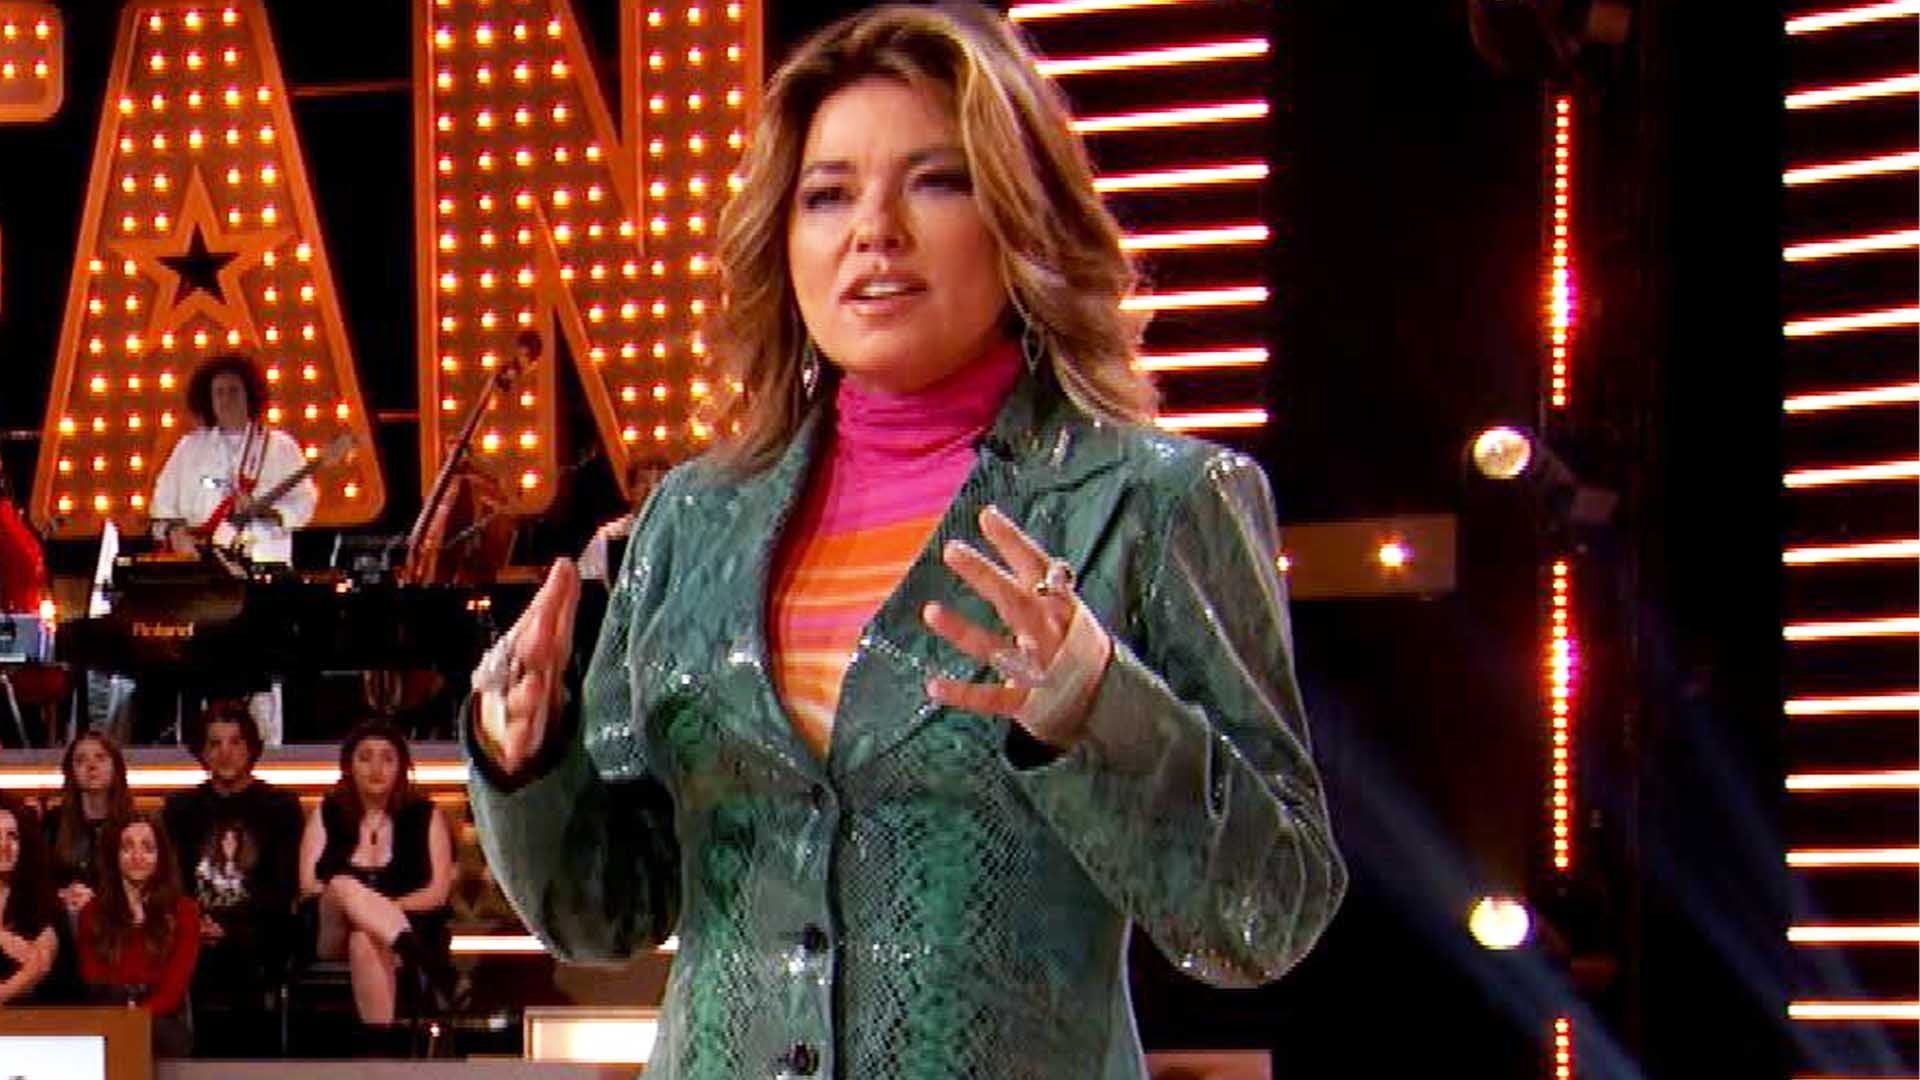 'Superfan’: Behind the Scenes of CBS' New Music-Themed Competition With Shania Twain and More!